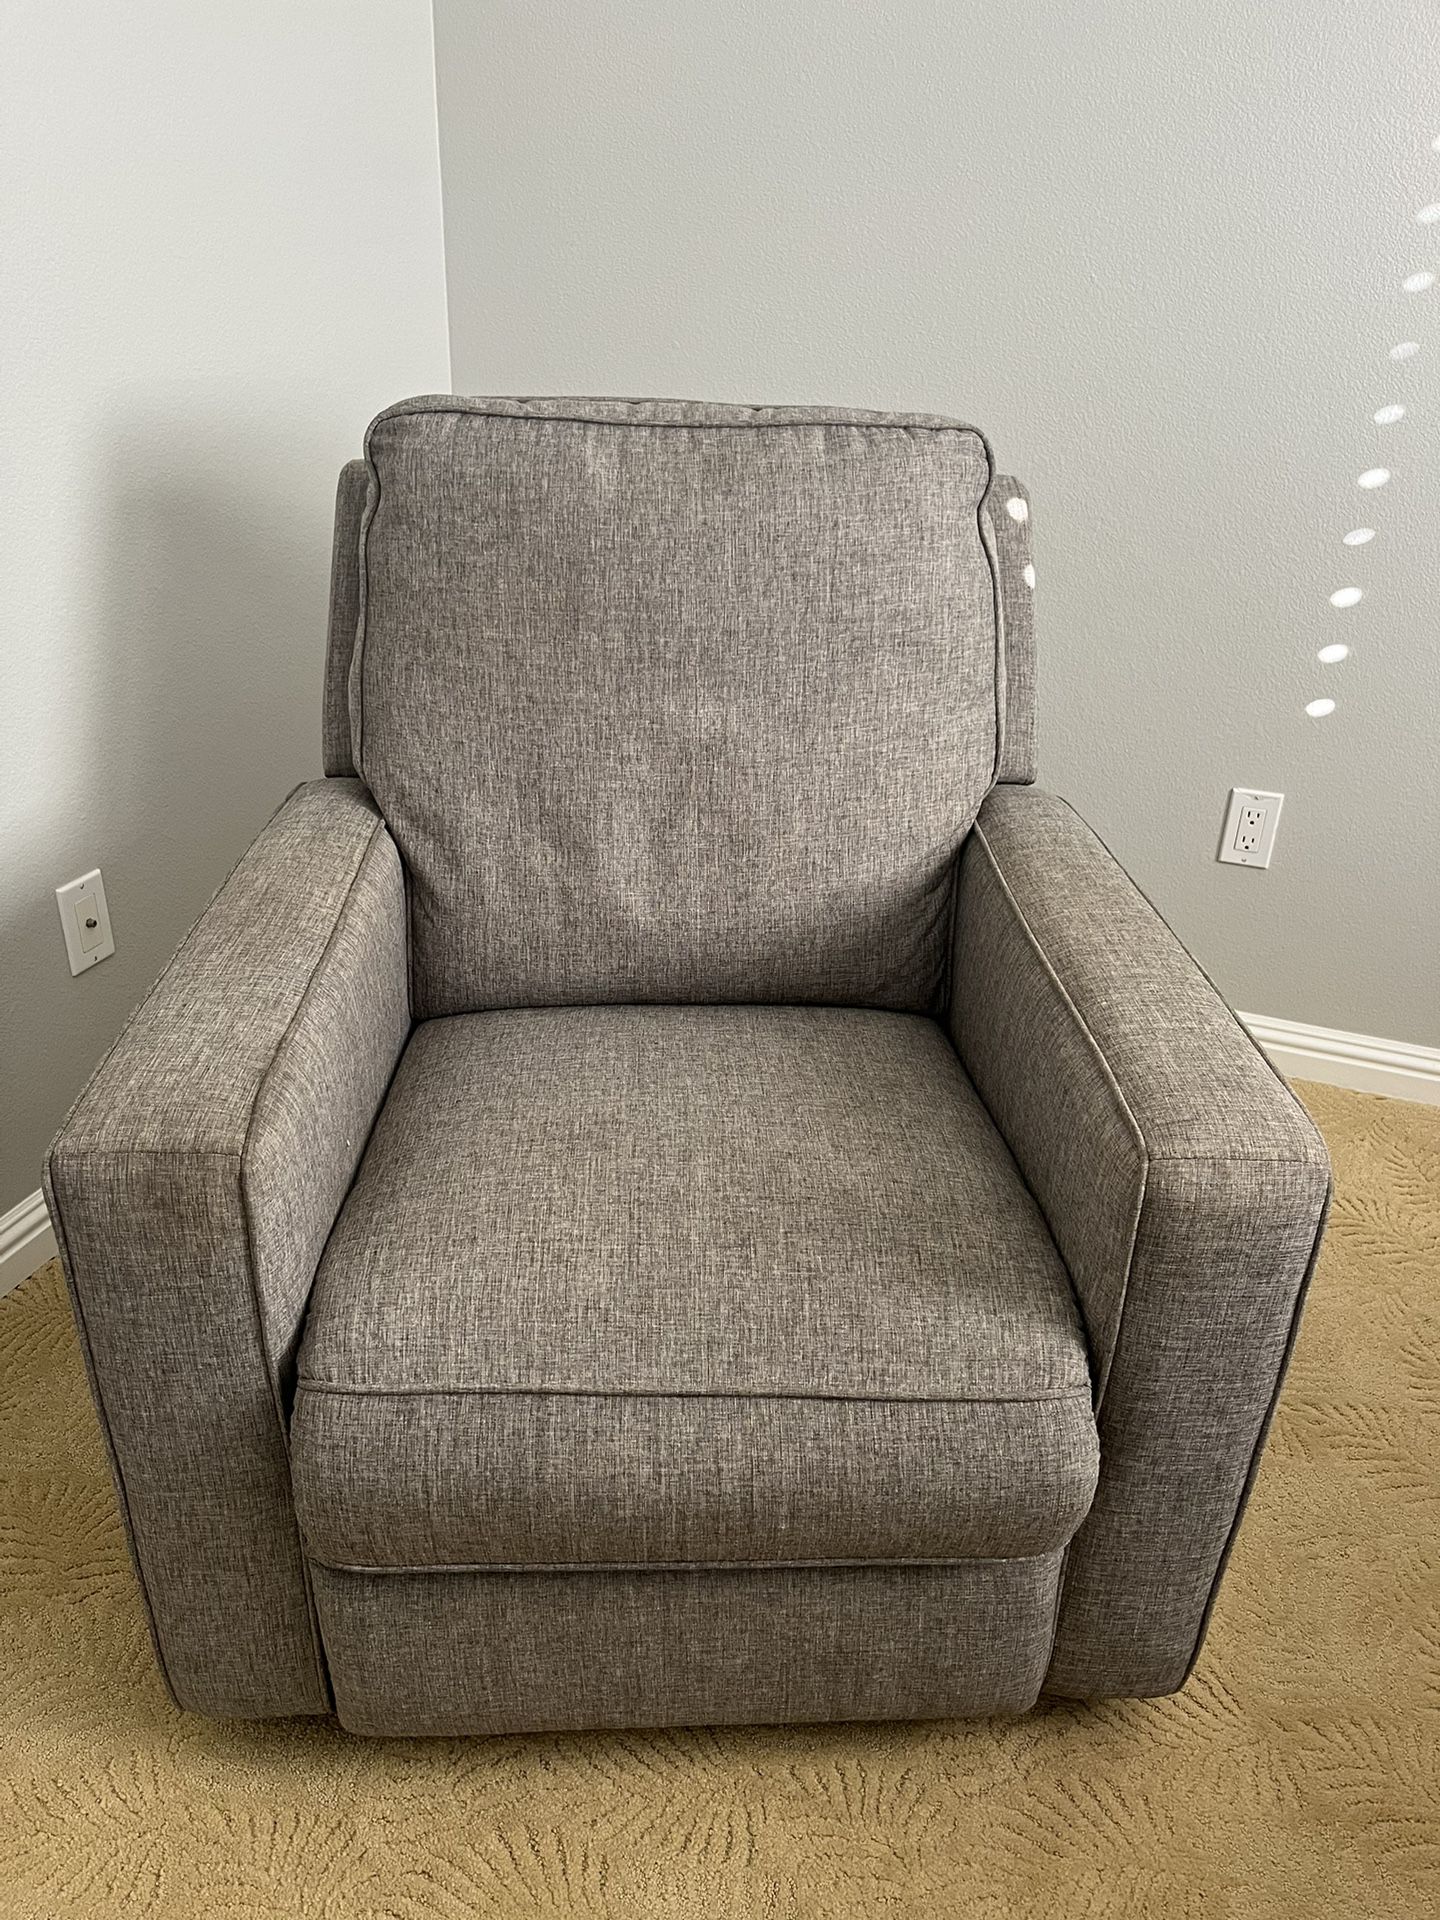 Recliner Chair, Gray In Color 